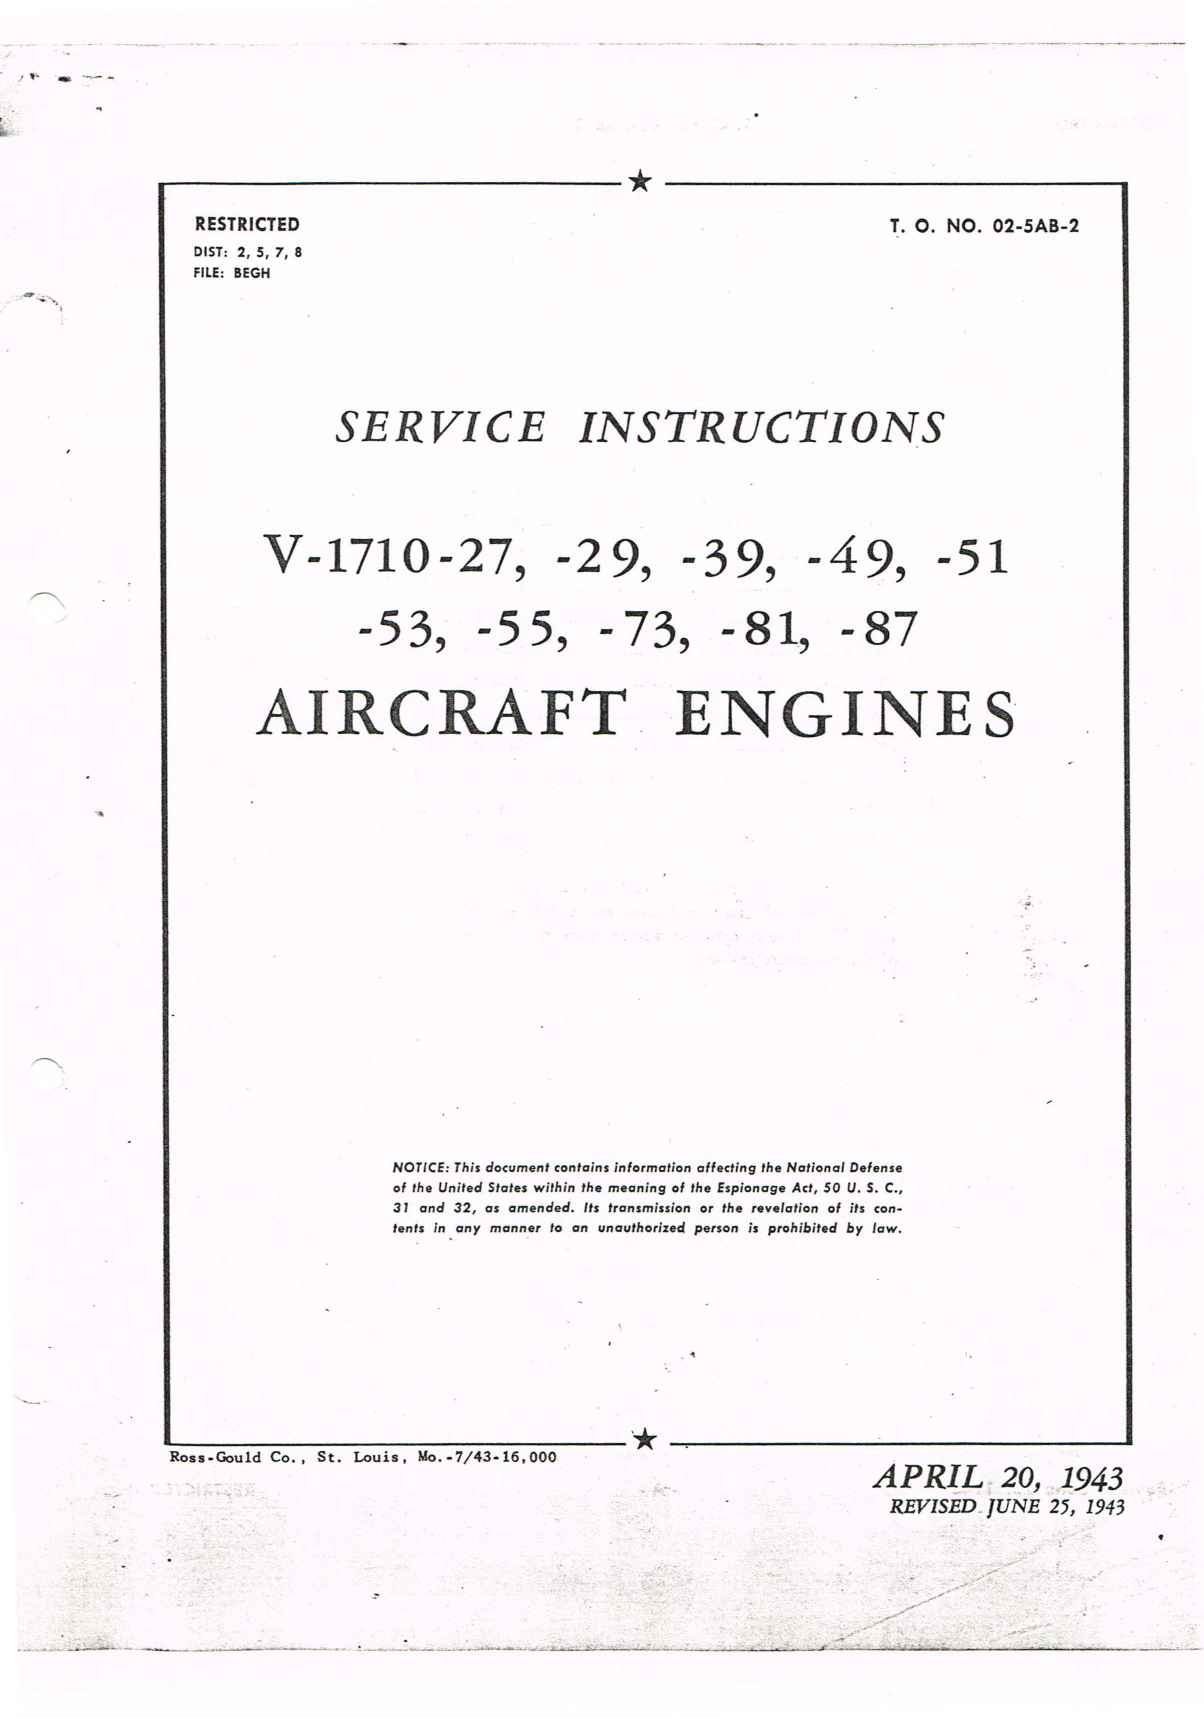 Sample page 1 from AirCorps Library document: Service Instructions for V-1710 Series Engines